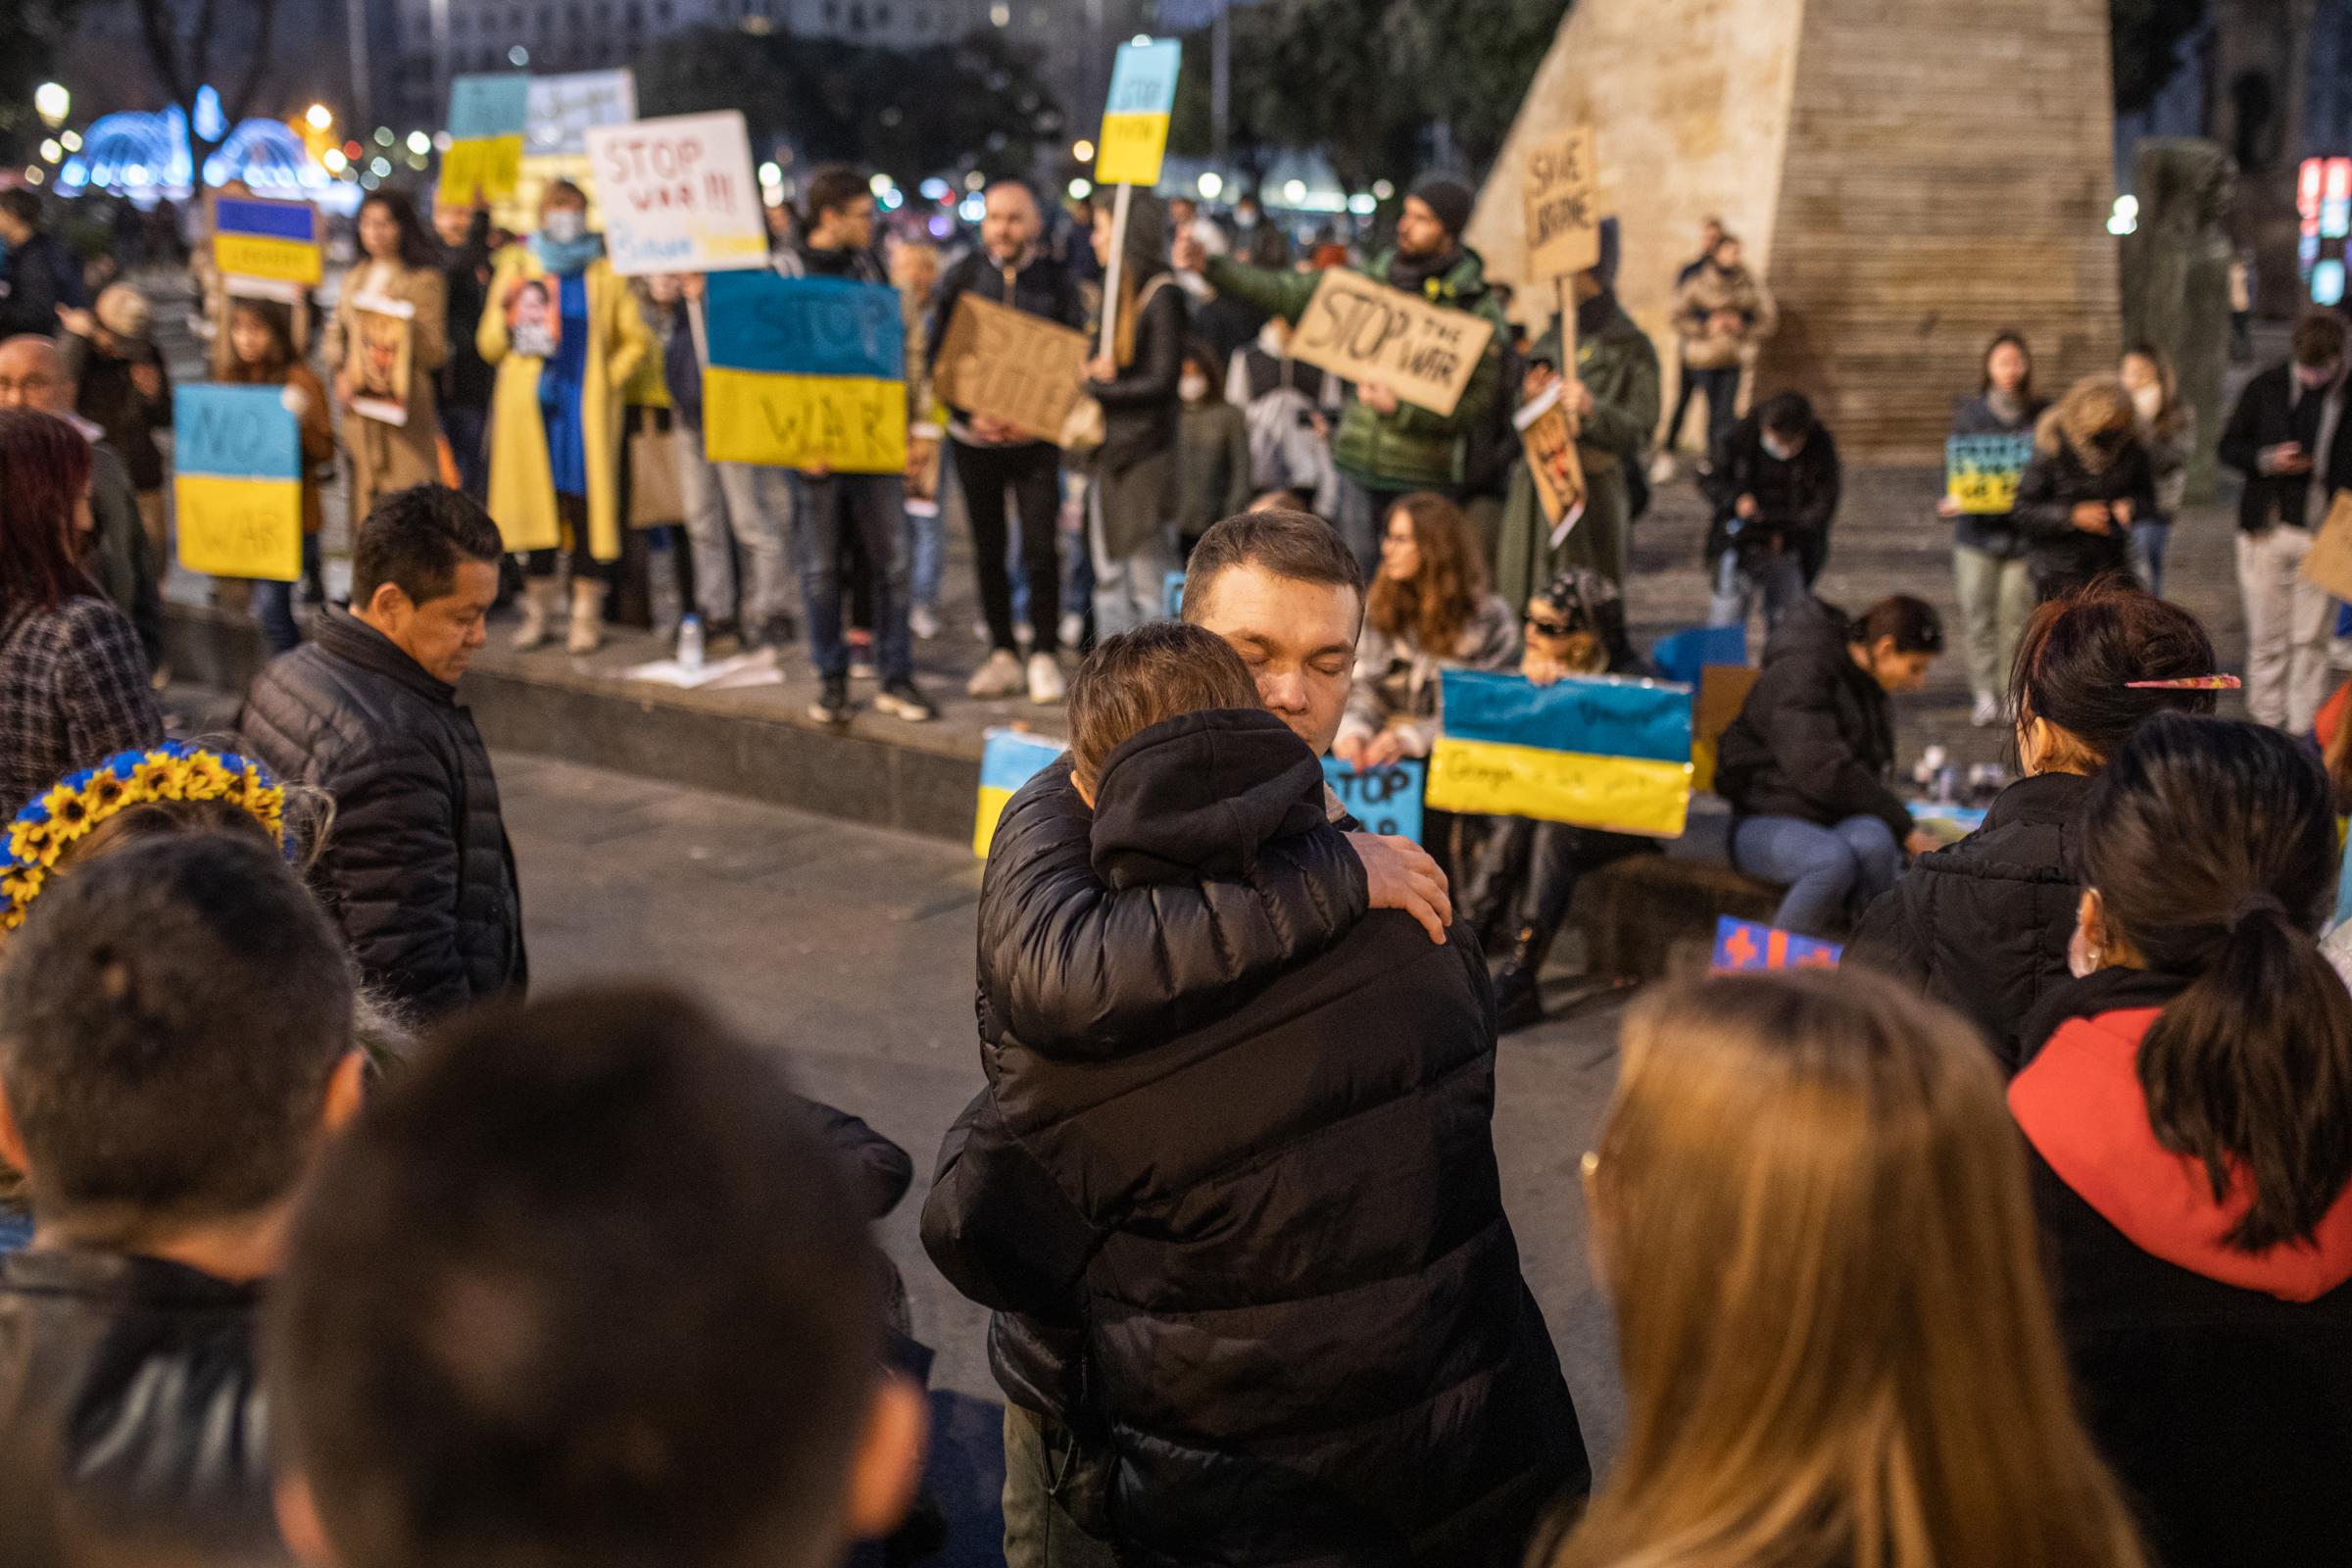 Protestors In Spain Rally For Ukraine After Russian Invasion - BARCELONA, SPAIN - FEBRUARY 26: A couple embrace at a...